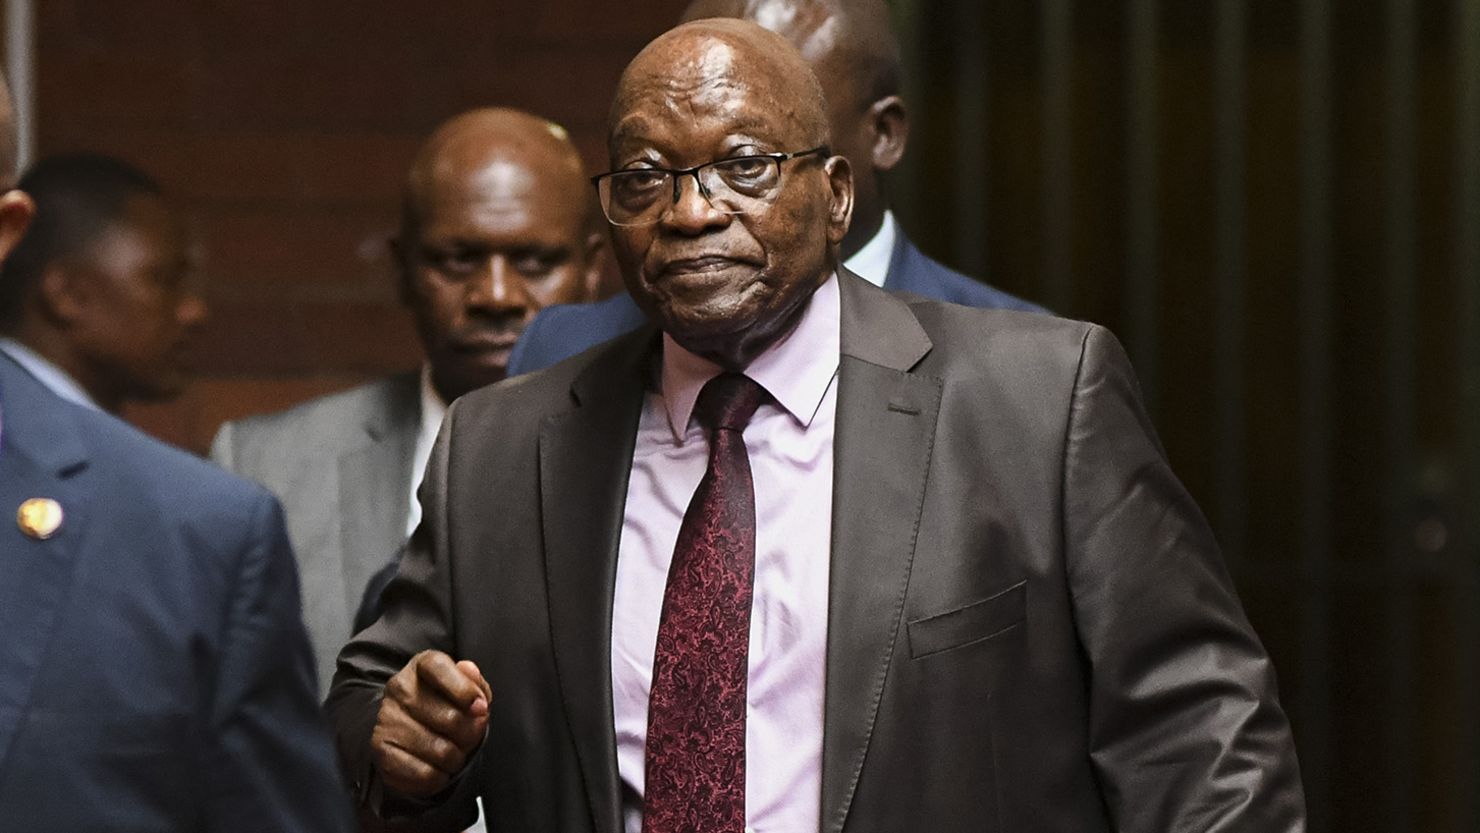 Jacob Zuma, pictured in court in March 2023, served as South Africa's president for 10 years from 2008.